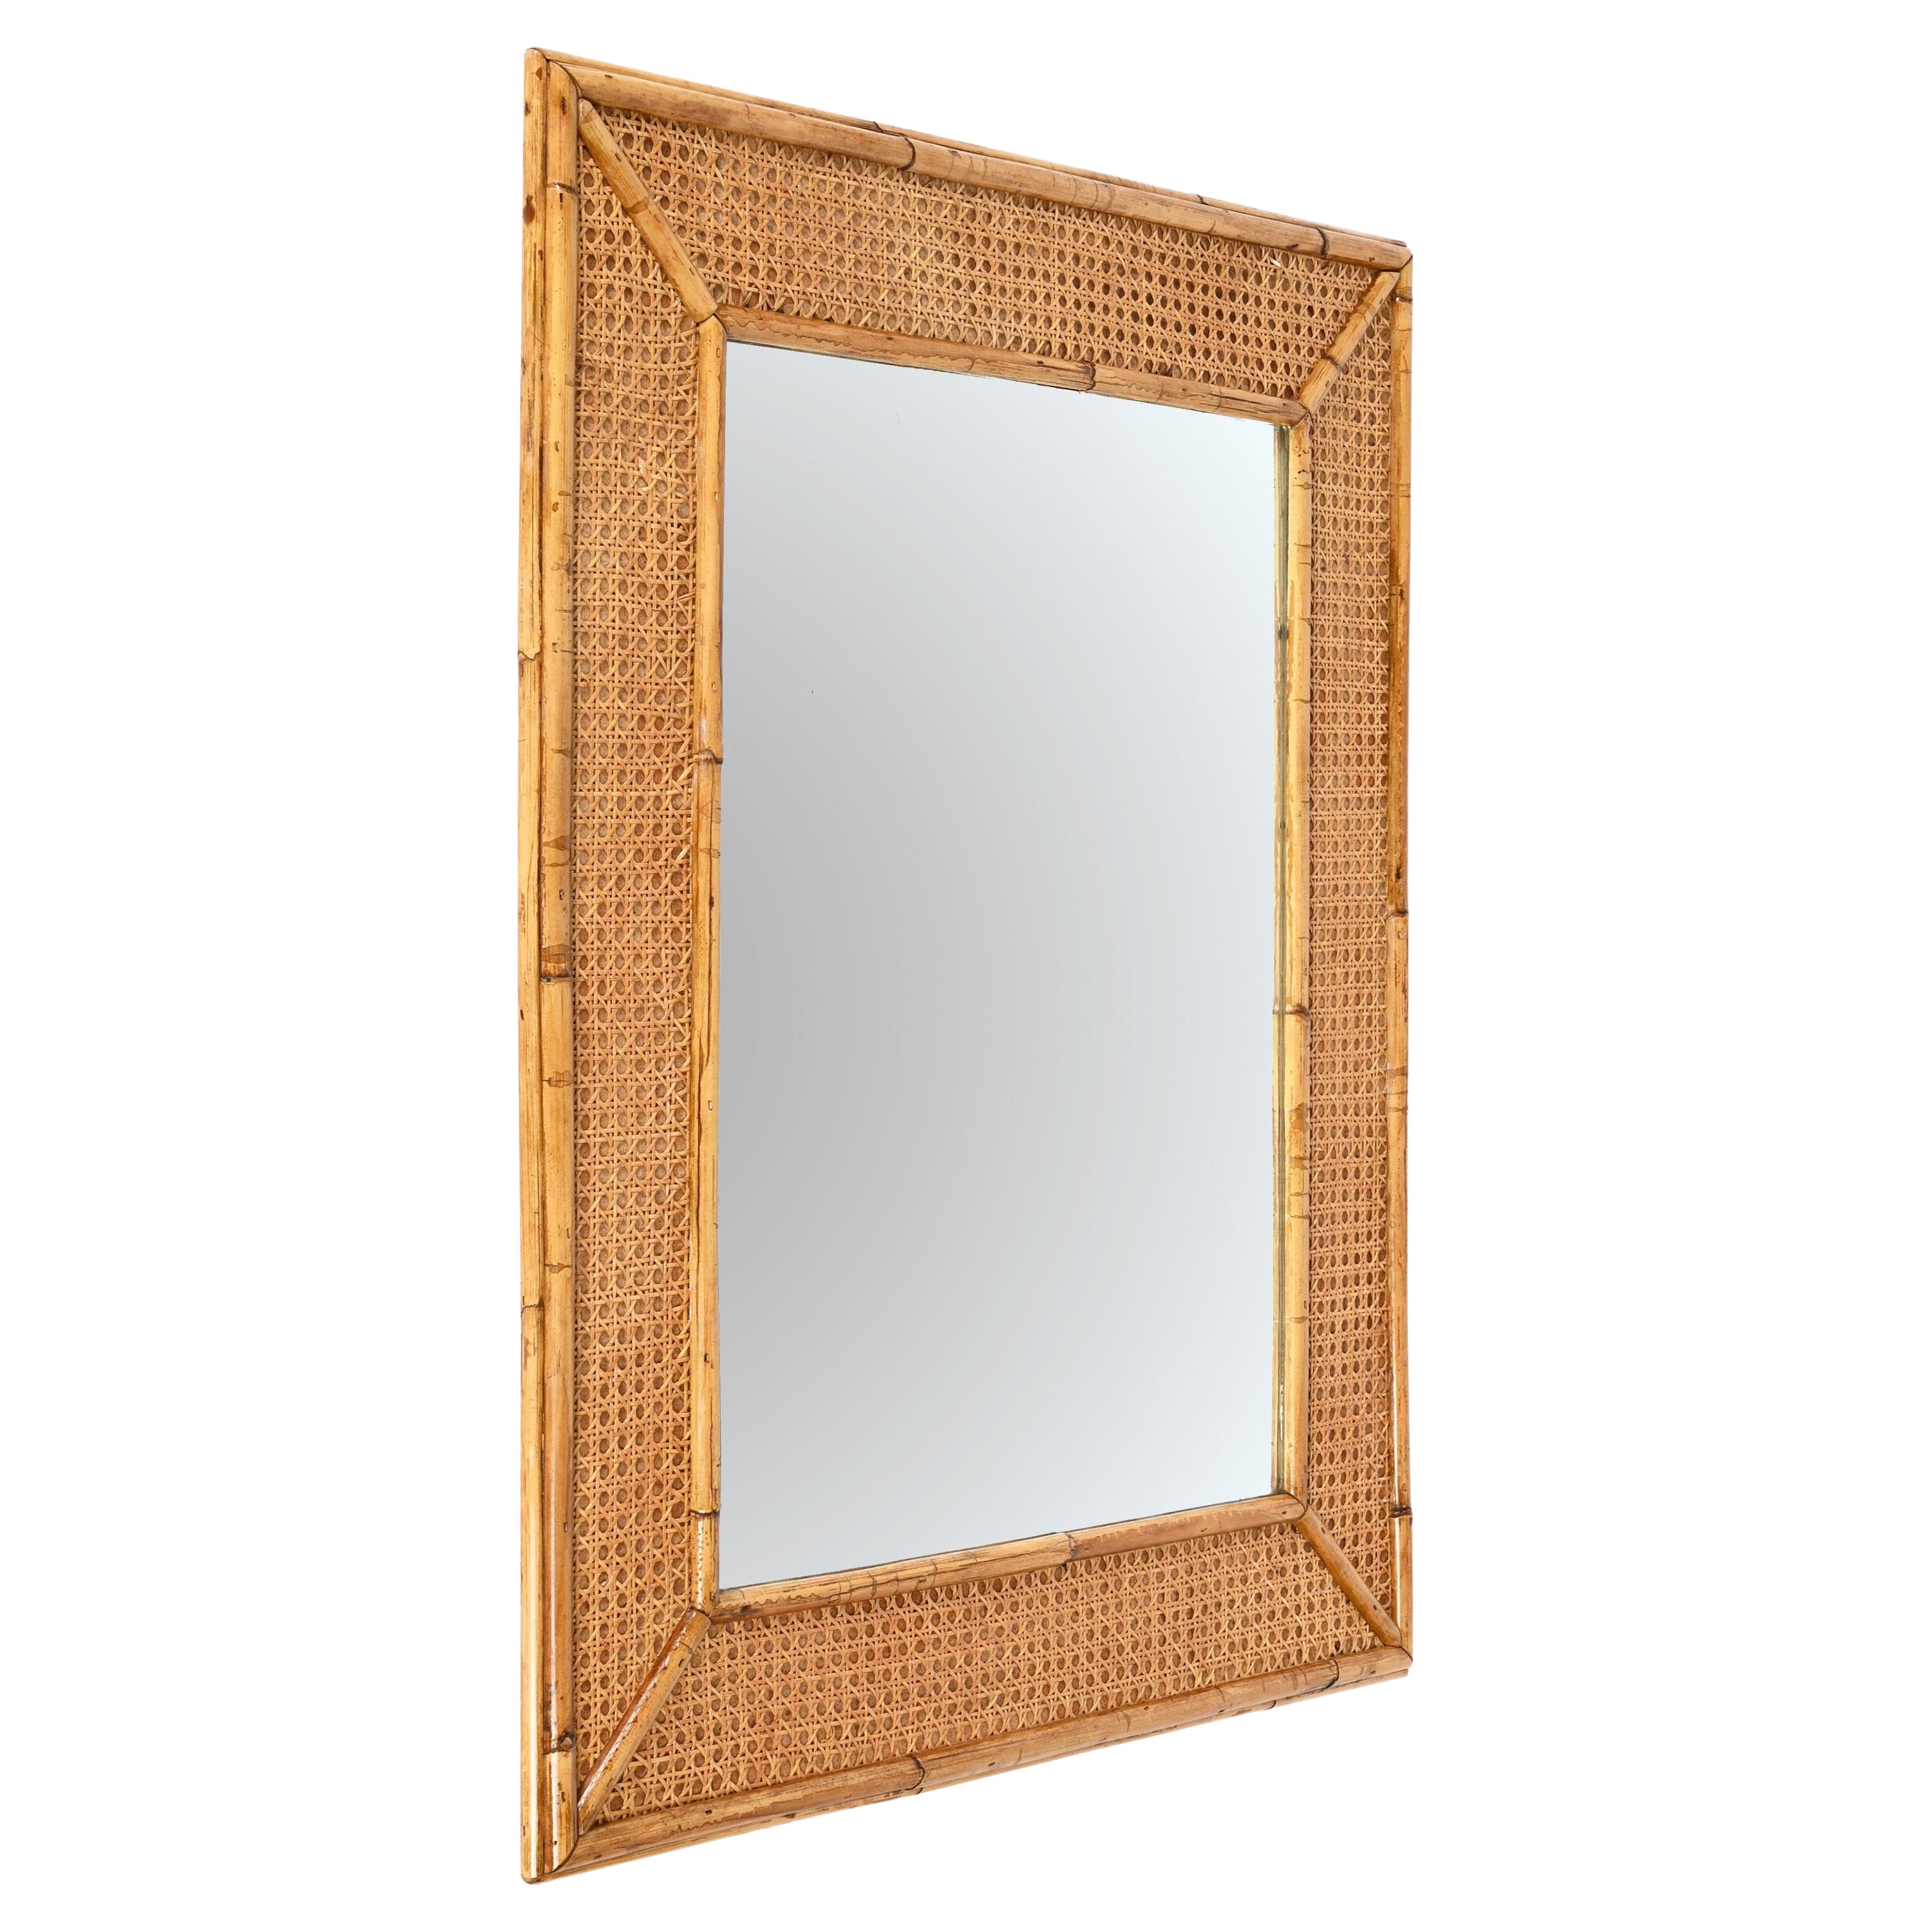 Midcentury Rectangular Italian Mirror with Bamboo and Vienna Straw Frame, 1970s For Sale